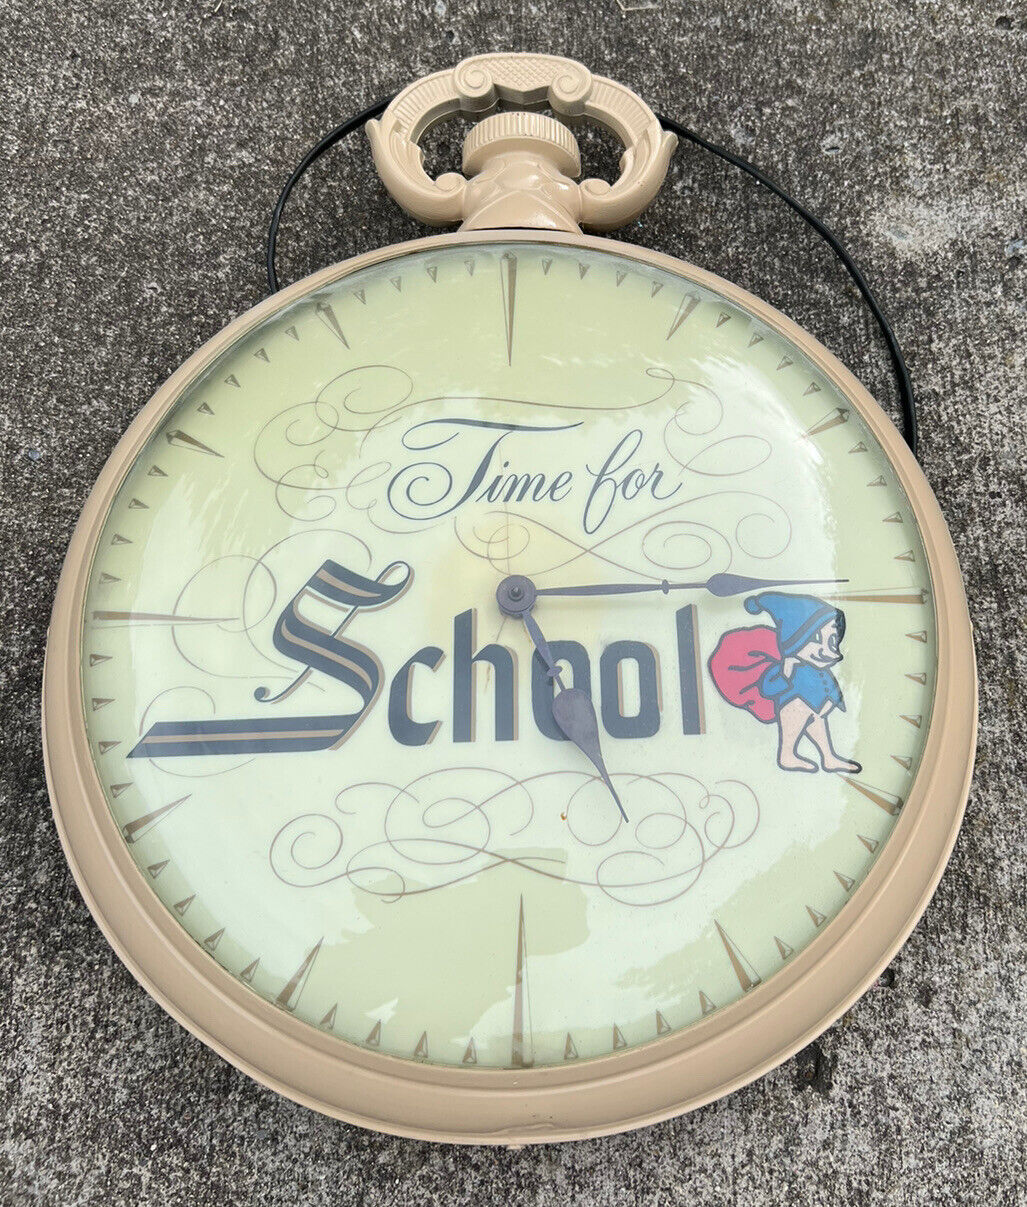 RARE Vintage TIME FOR SCHOOL Pocket Watch Shaped Wall Clock Elf Gnome Hobo